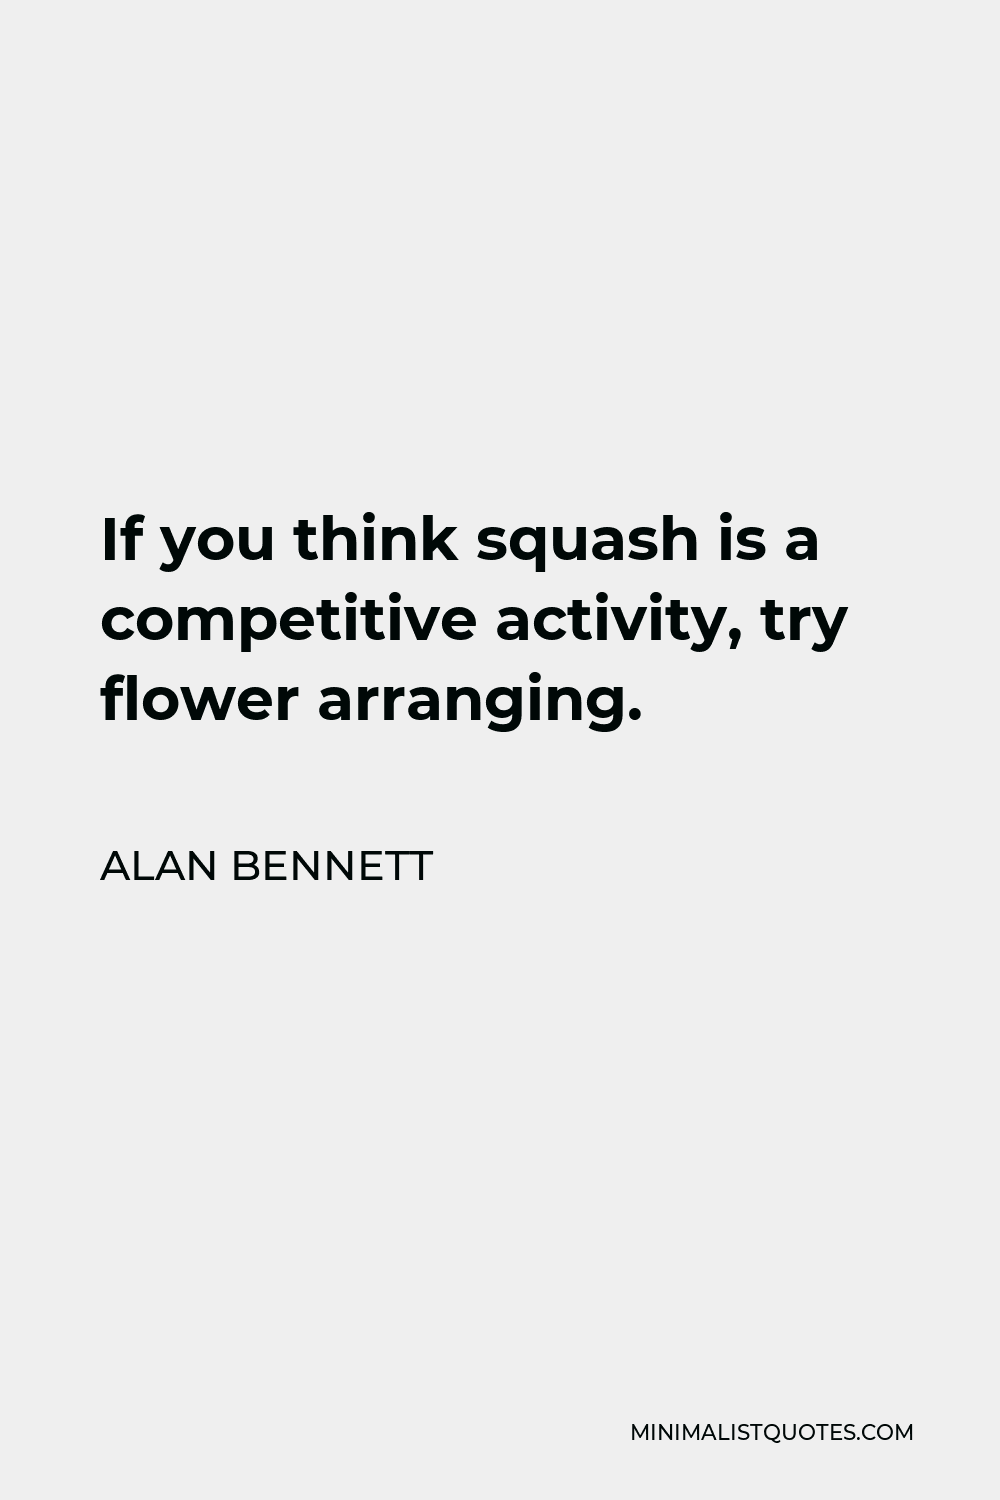 Alan Bennett Quote - If you think squash is a competitive activity, try flower arranging.